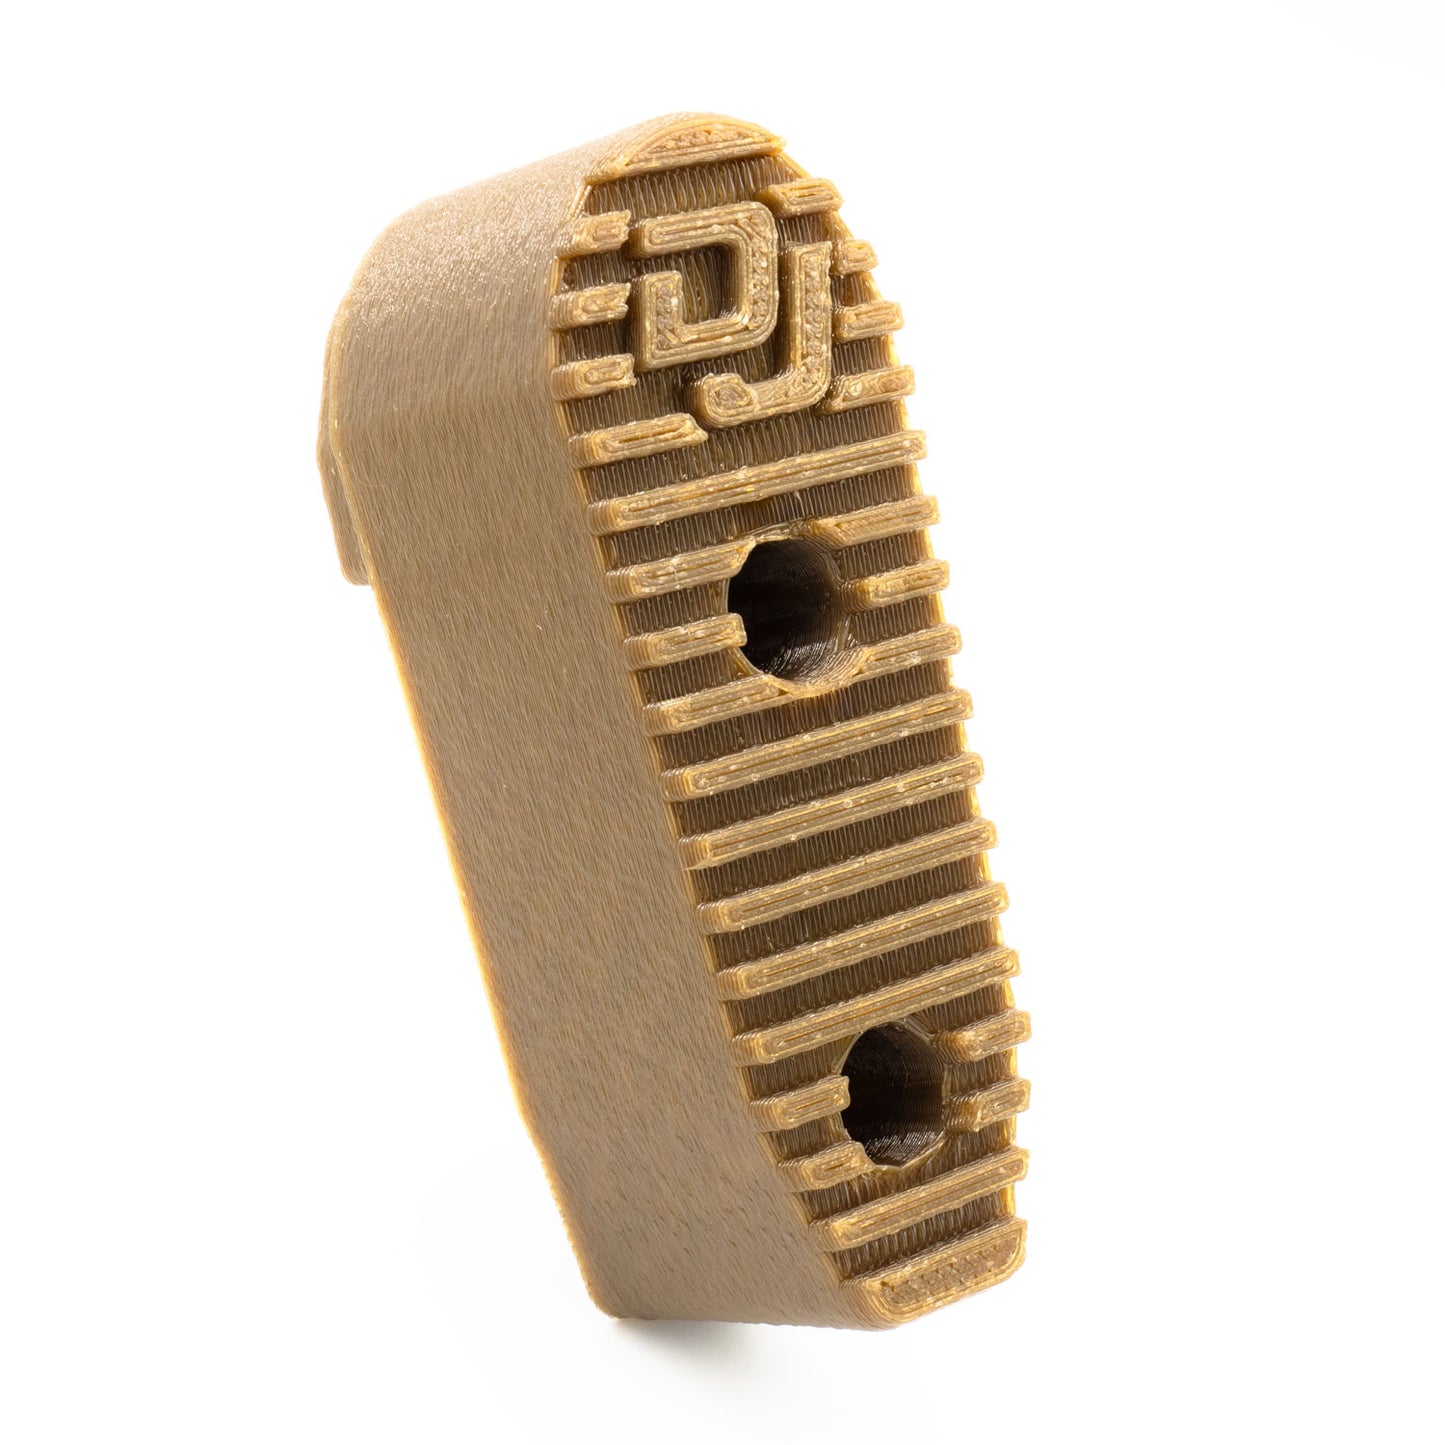 Recoil pad for Magpul SL-M/K Stock